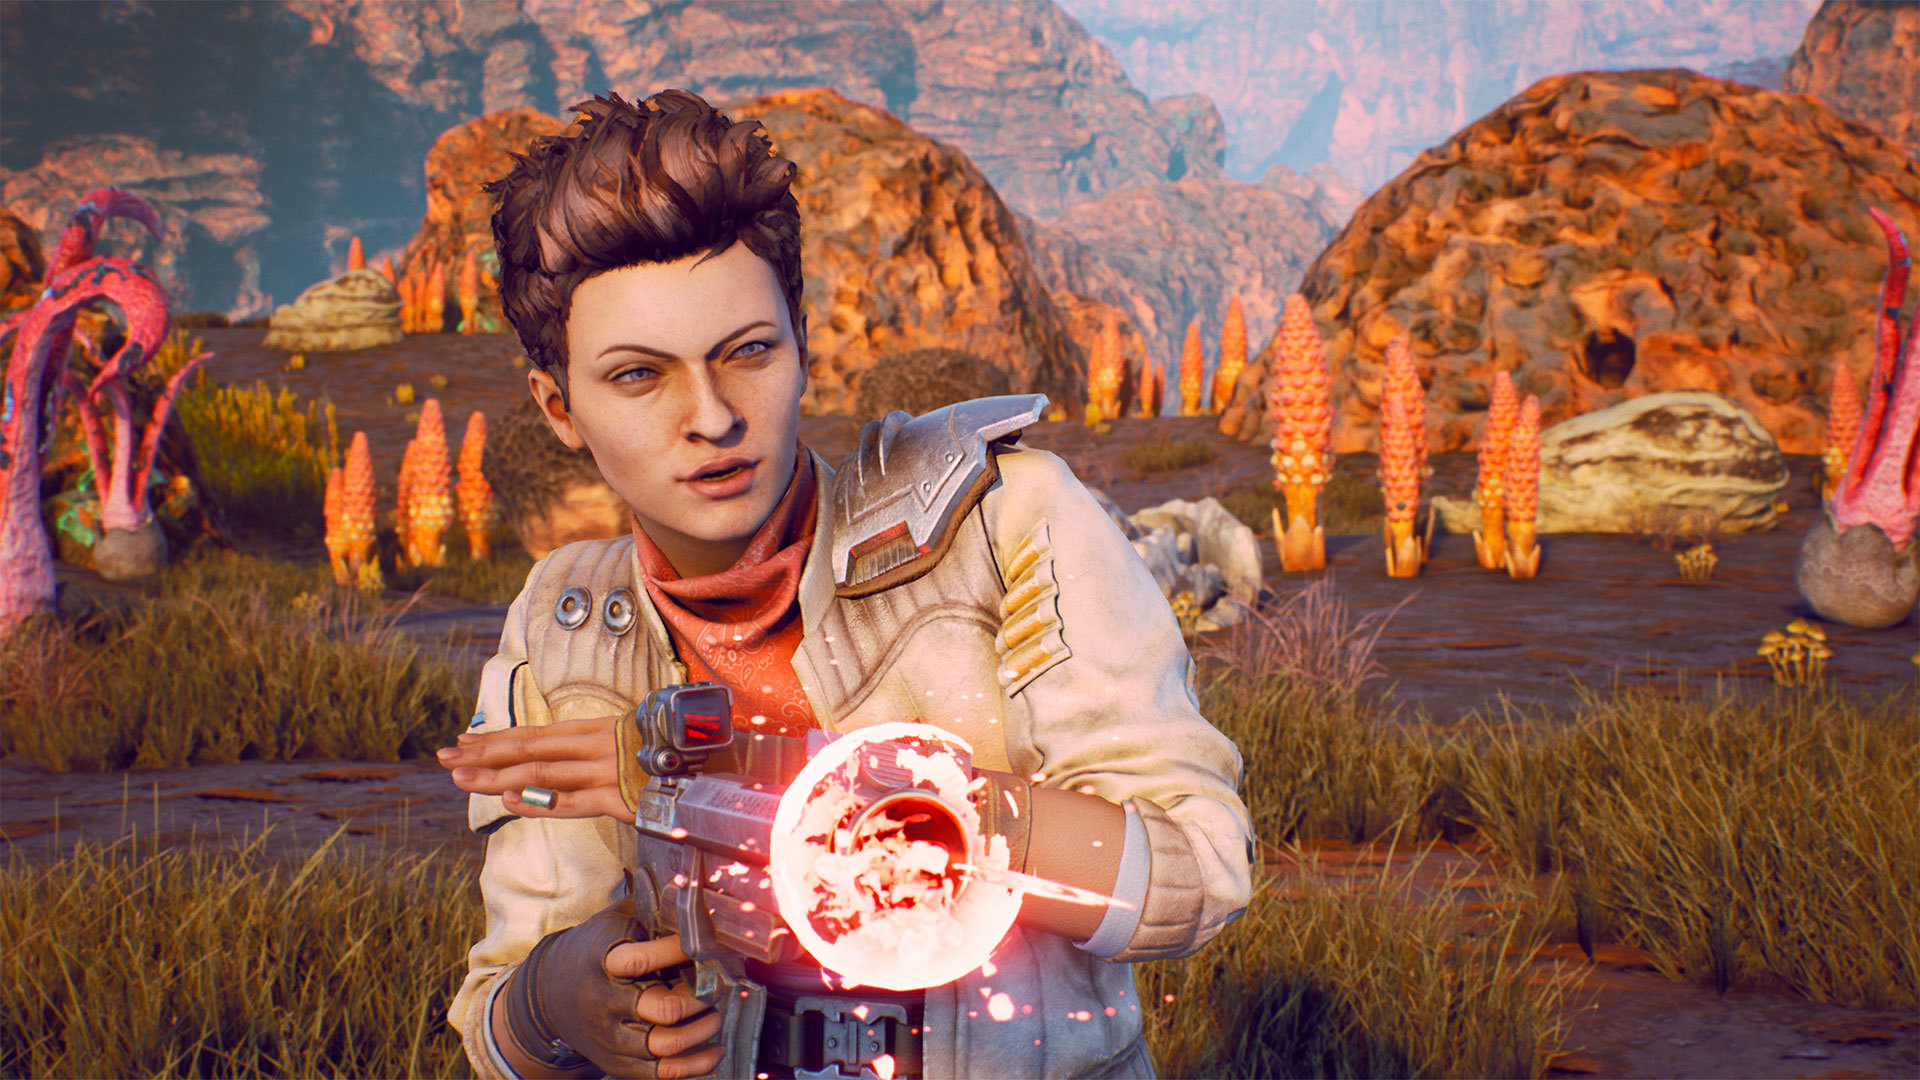 the outer worlds pc